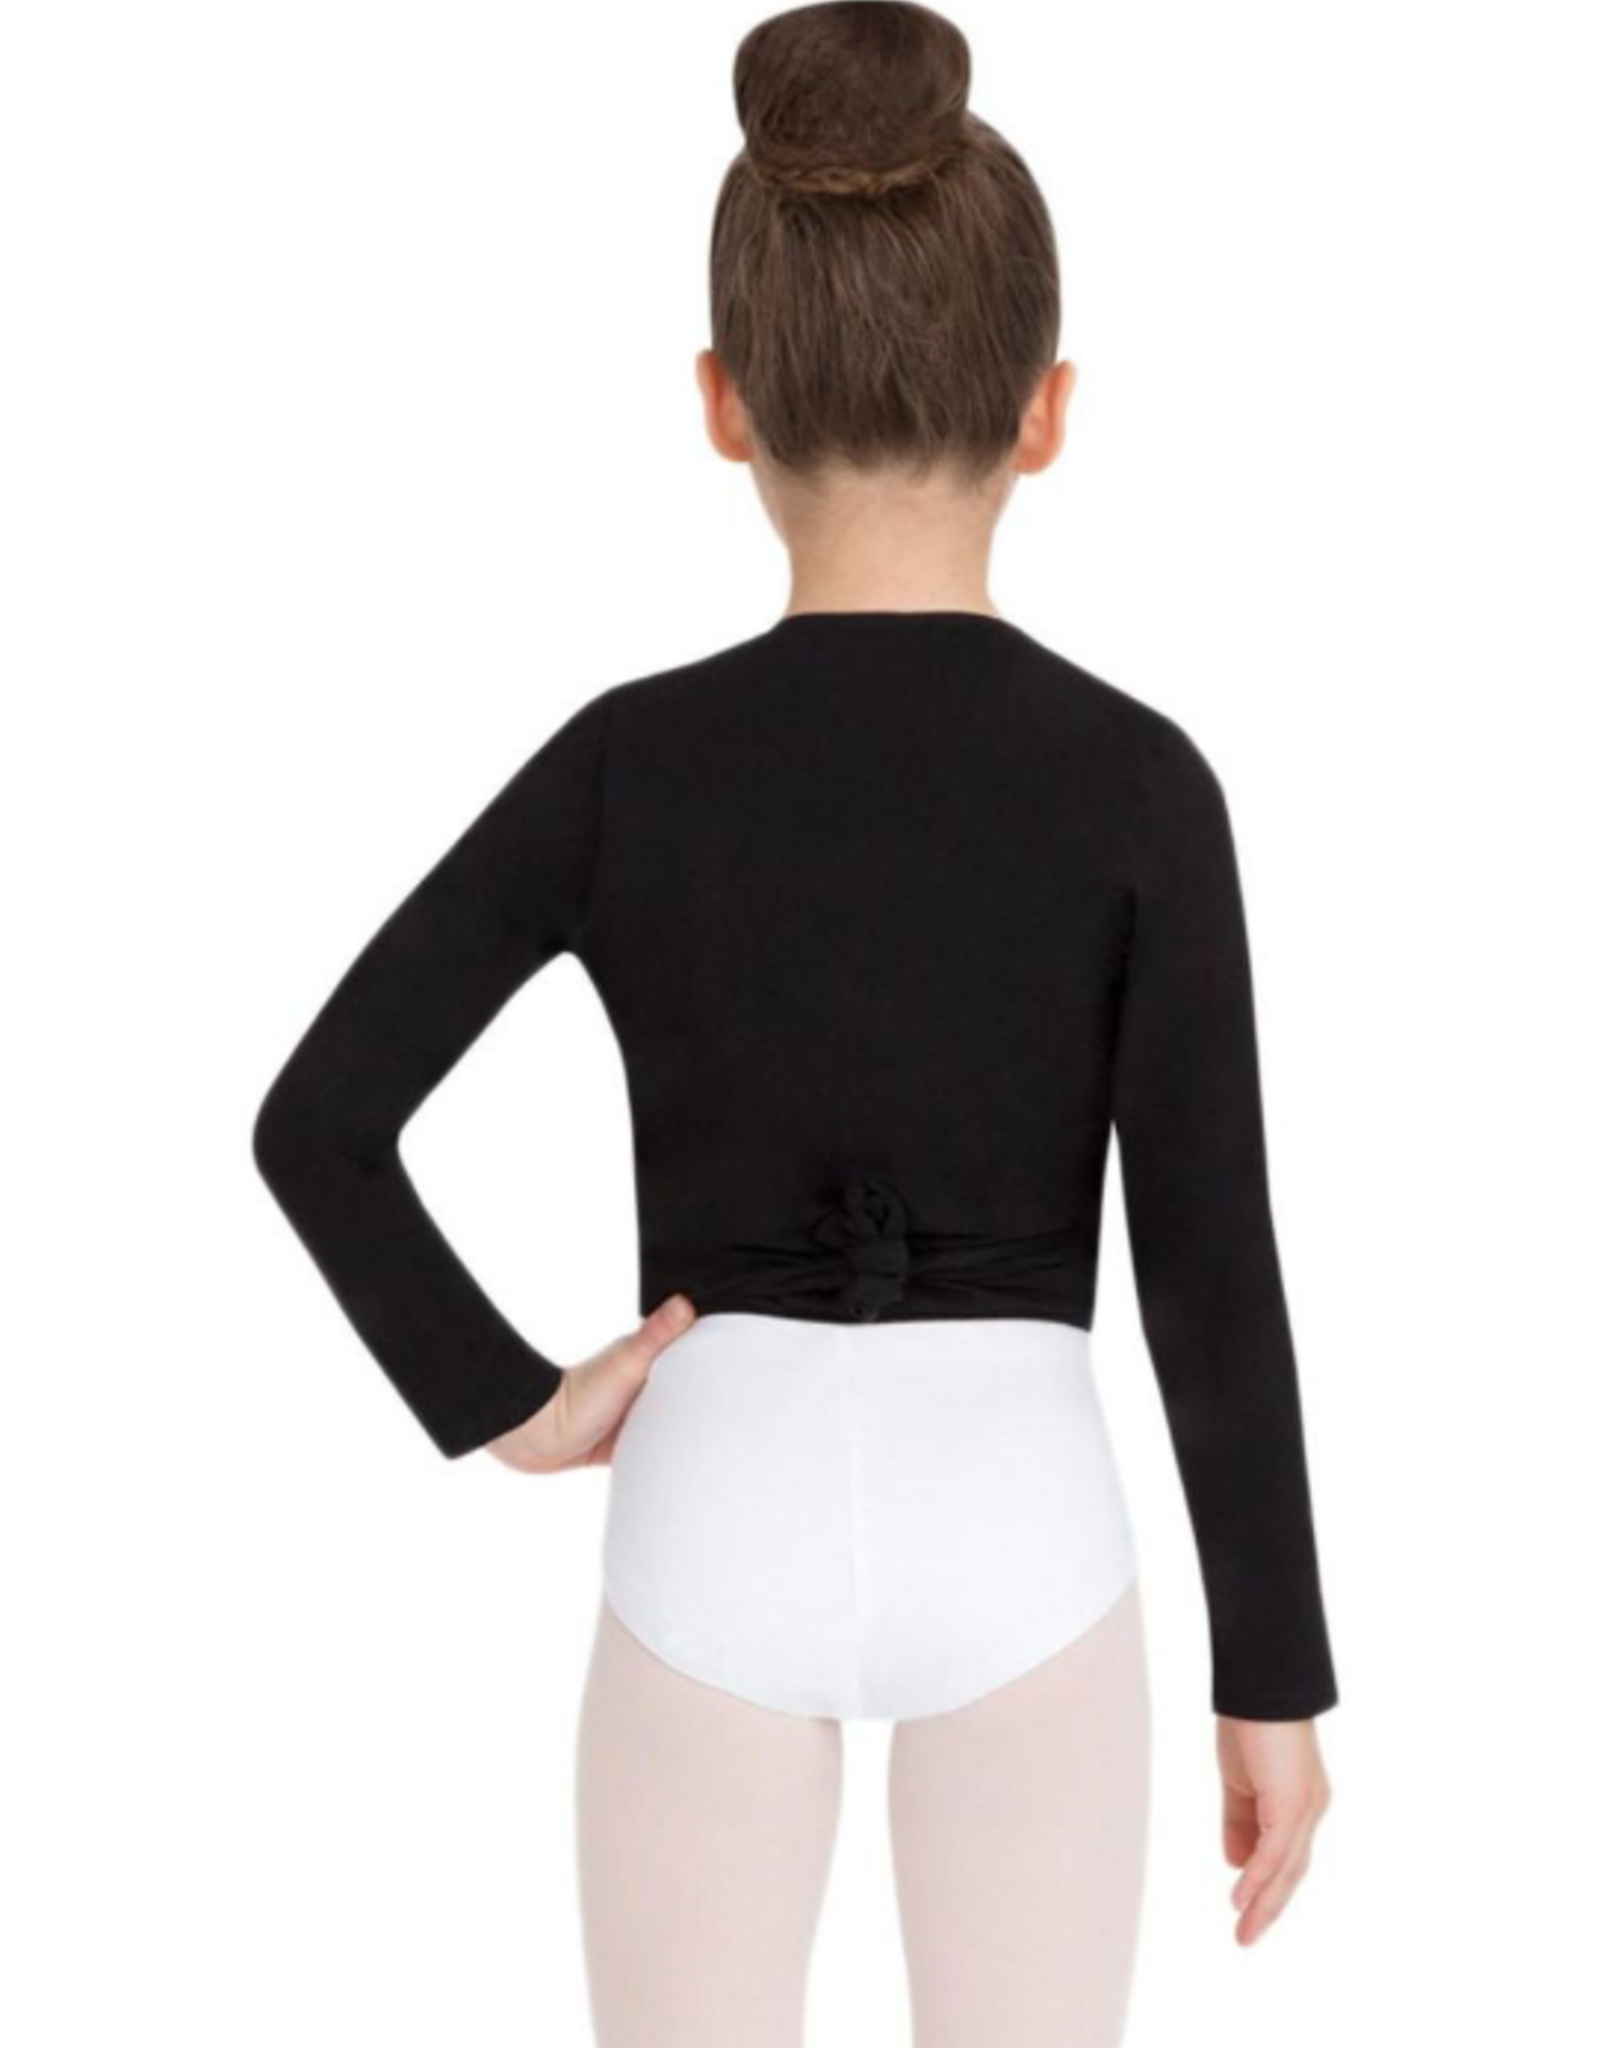 Lycra Long Sleeve Unitard by Bal Togs : Bal Togs 8815, On Stage Dancewear,  Capezio Authorized Dealer.